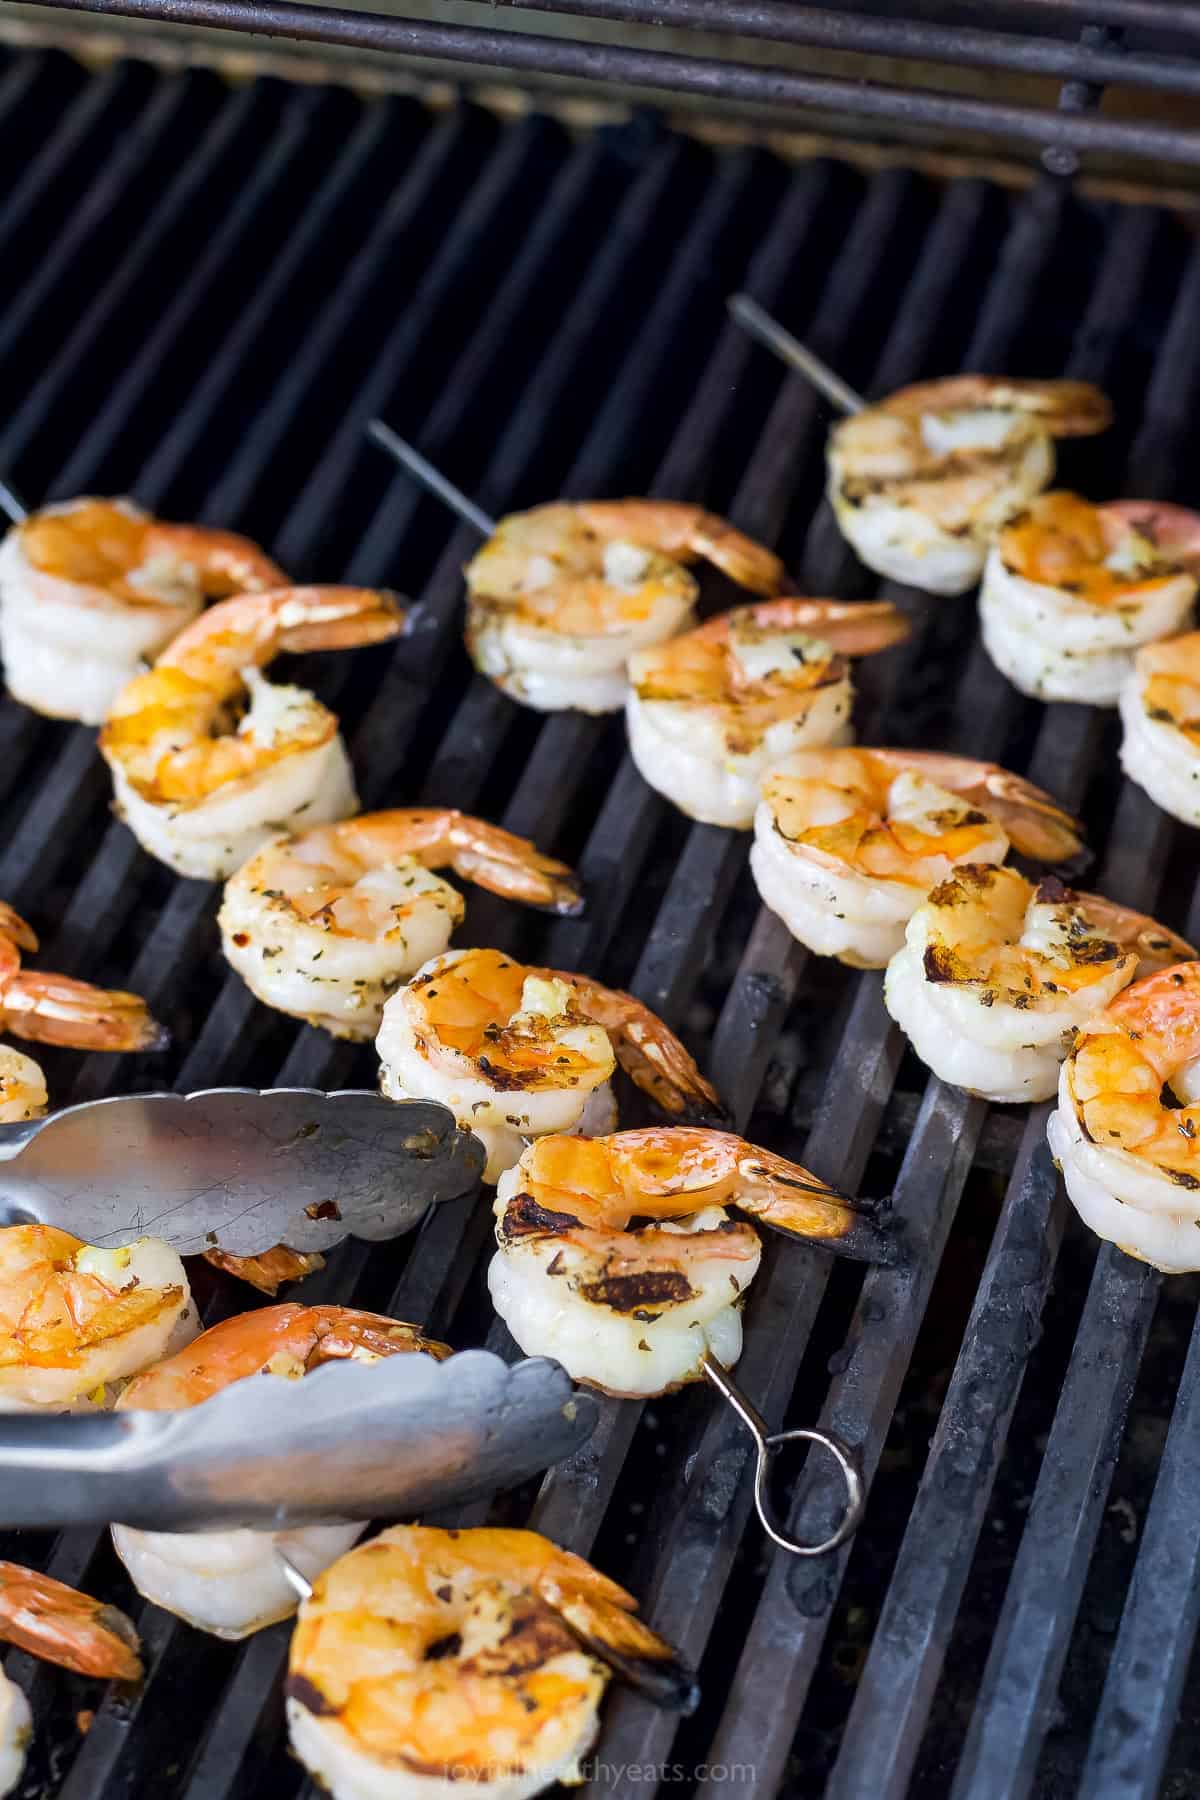 Shrimp cooking on a grill with one side done